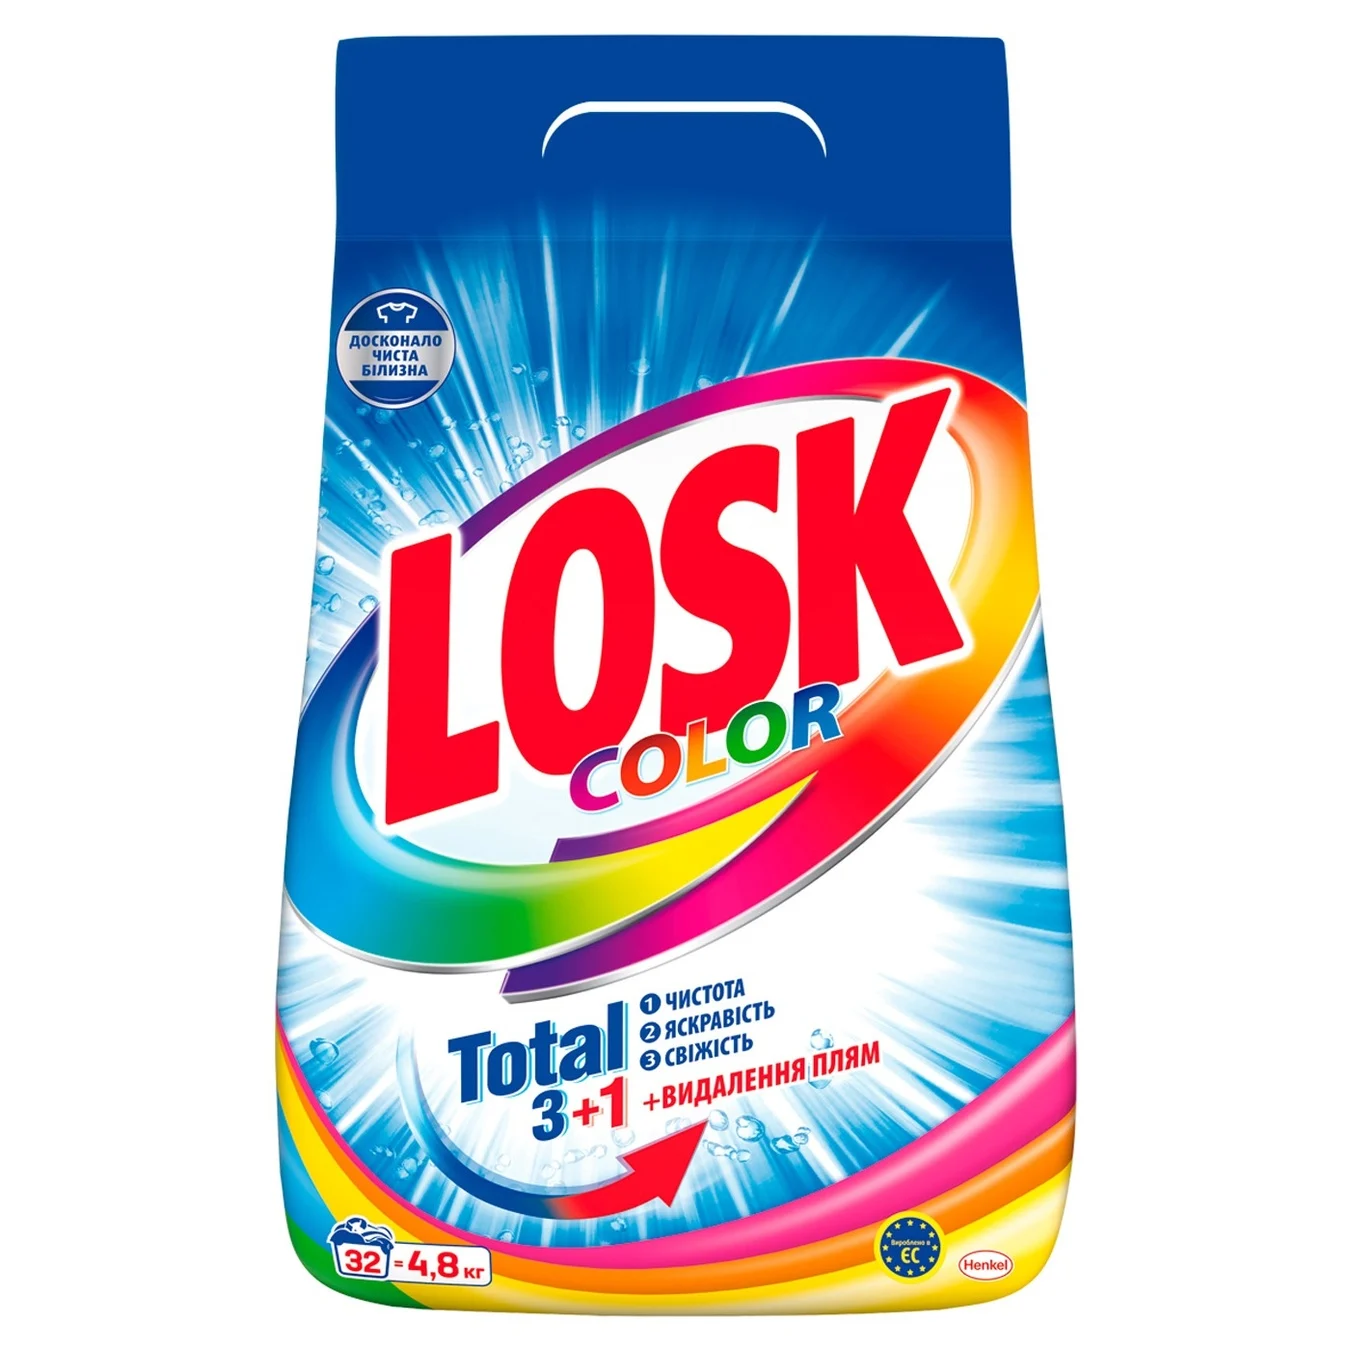 Losk machine washing powder machine for colored clothes, 4.8 kg 32 washing cycles